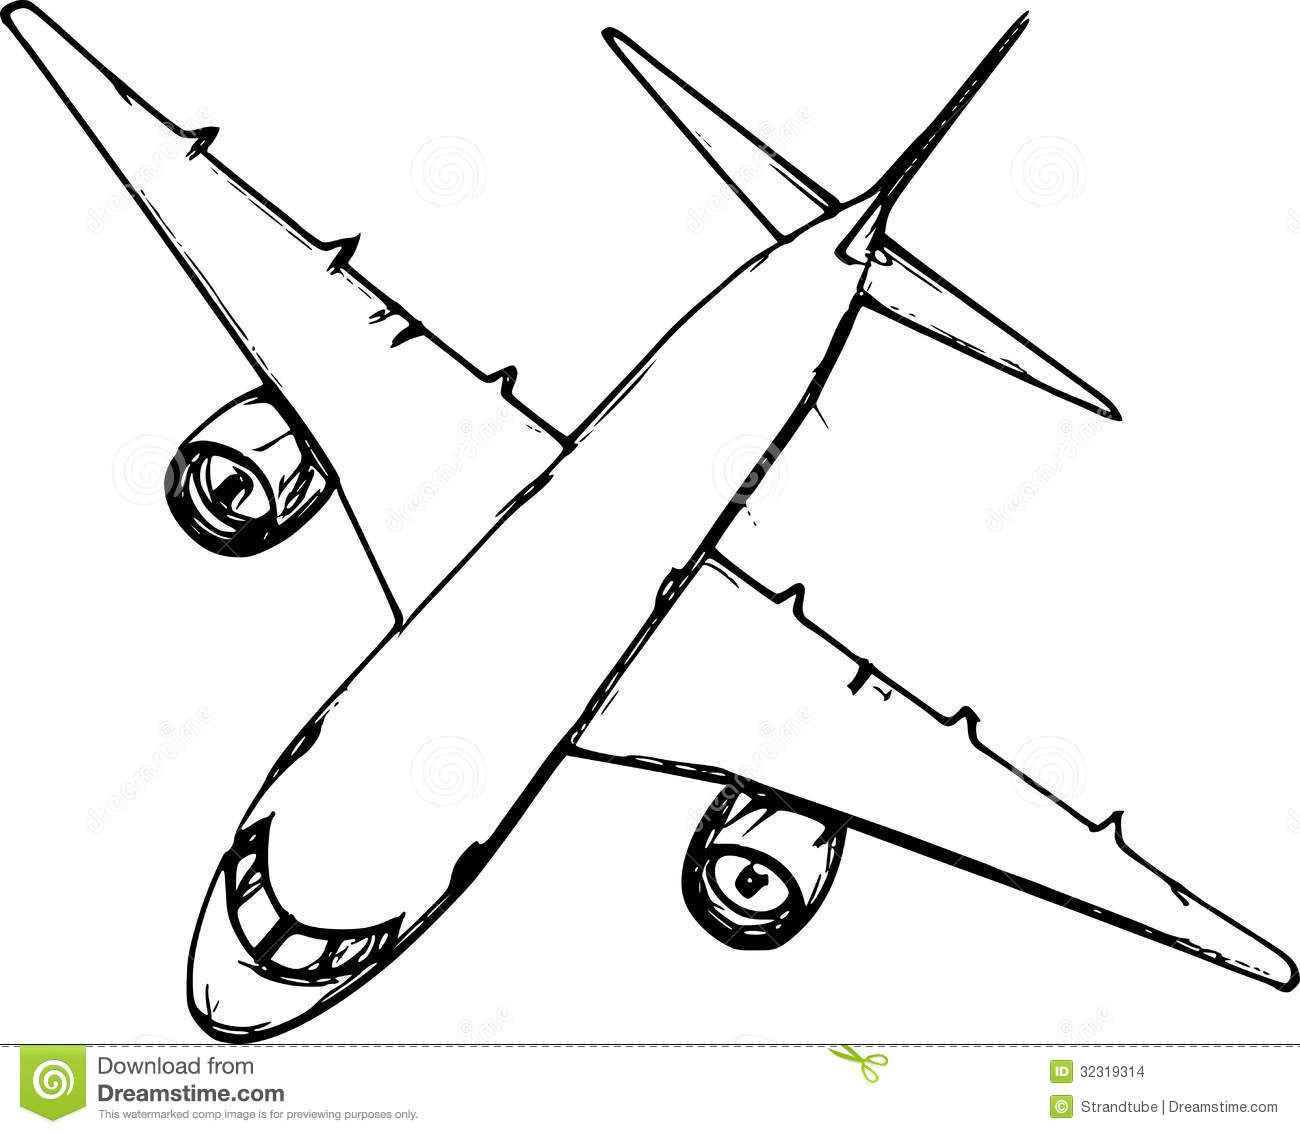 drawing of airplane simple